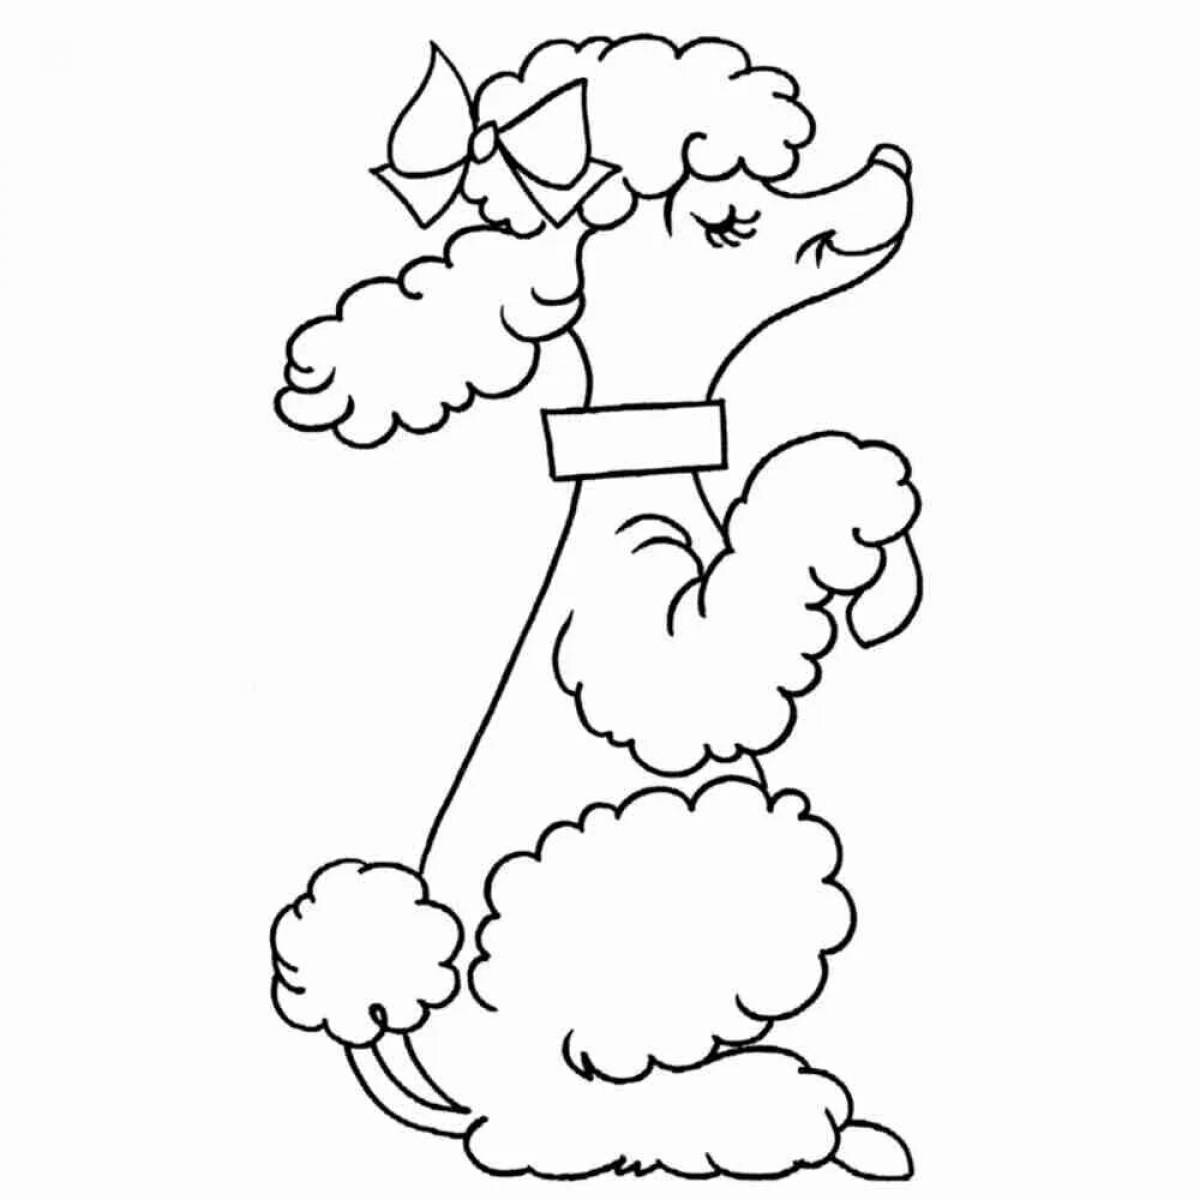 Gorgeous poodle coloring pages for kids